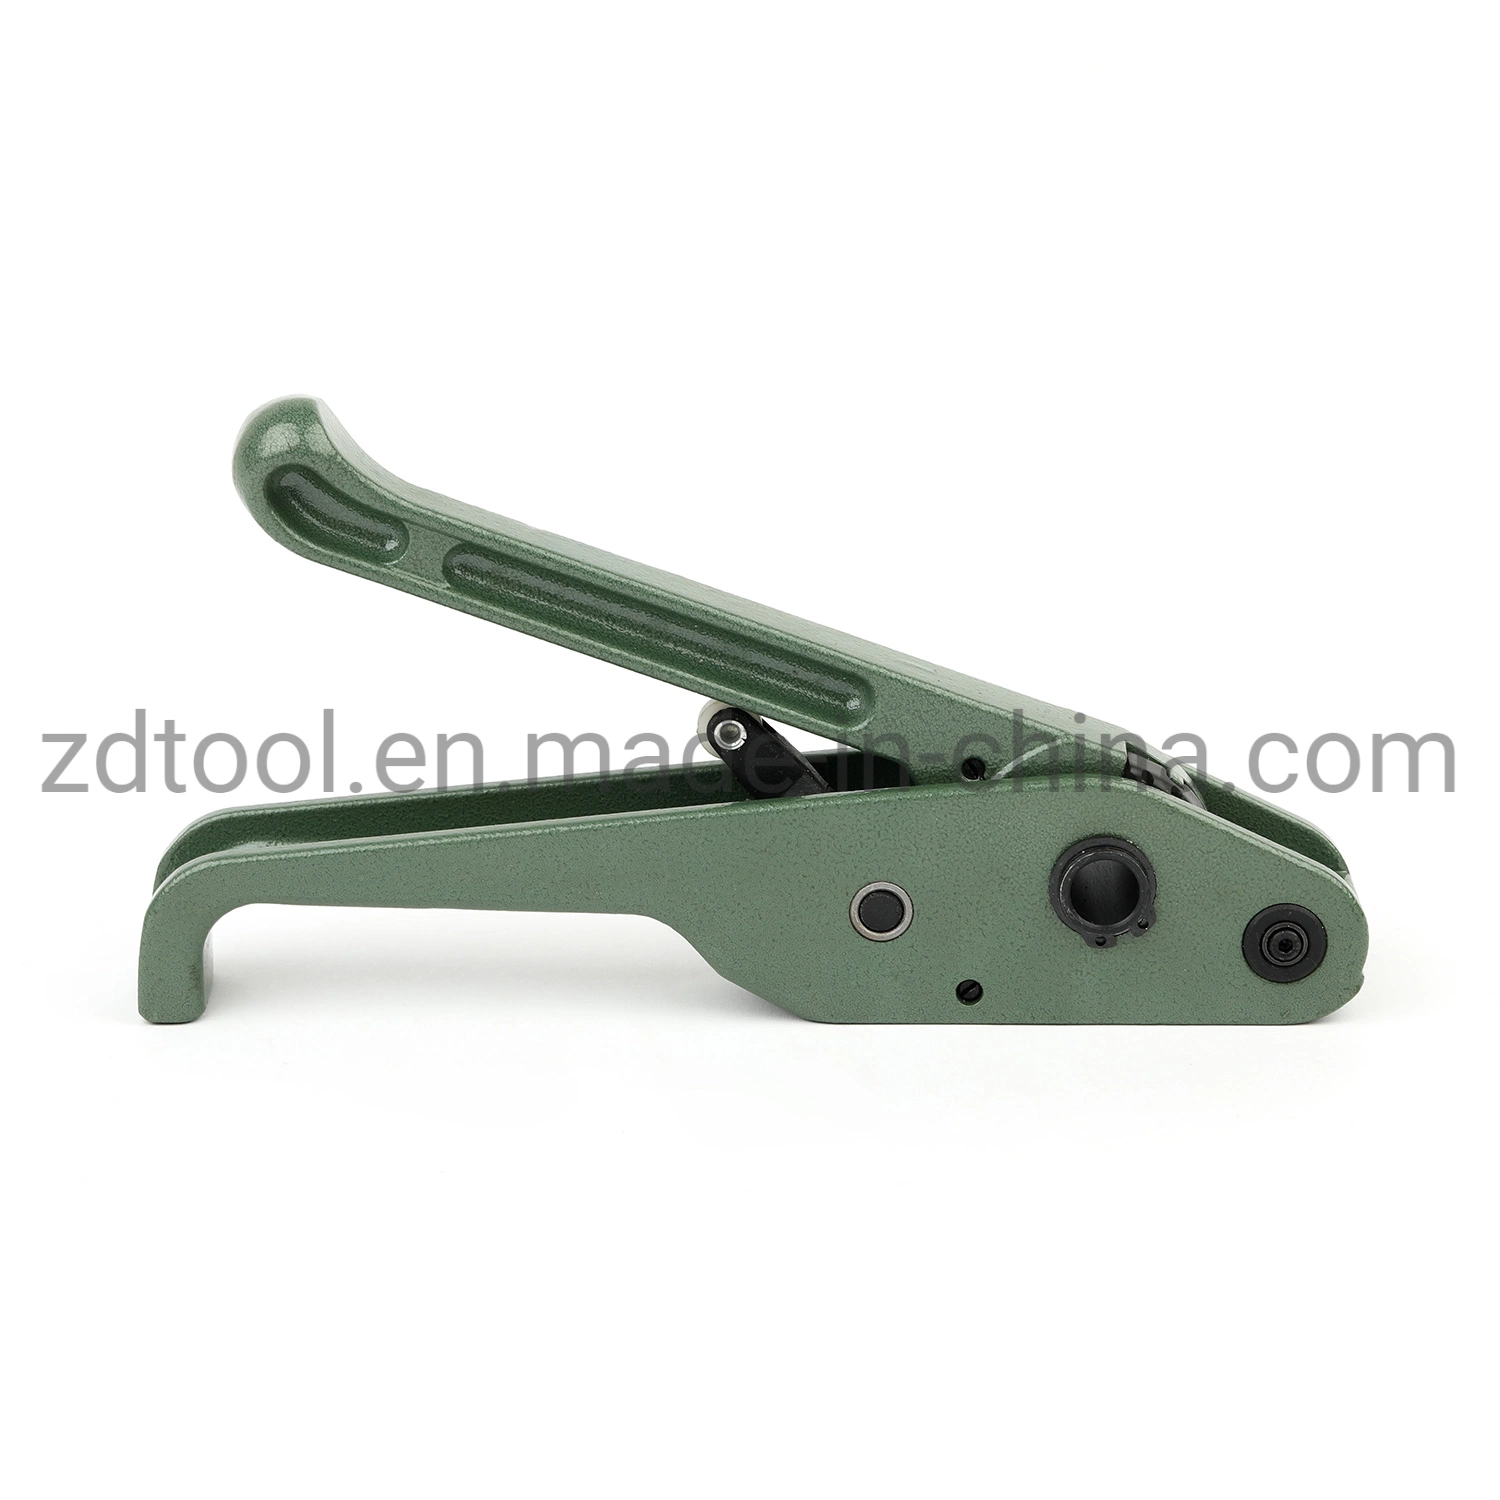 Manual Straps Tensioner, Hand Held Plastic Strapping Cut Machine, PP Pet Strapping Packaging Tools H19, Packing, Freeshipping (B310)